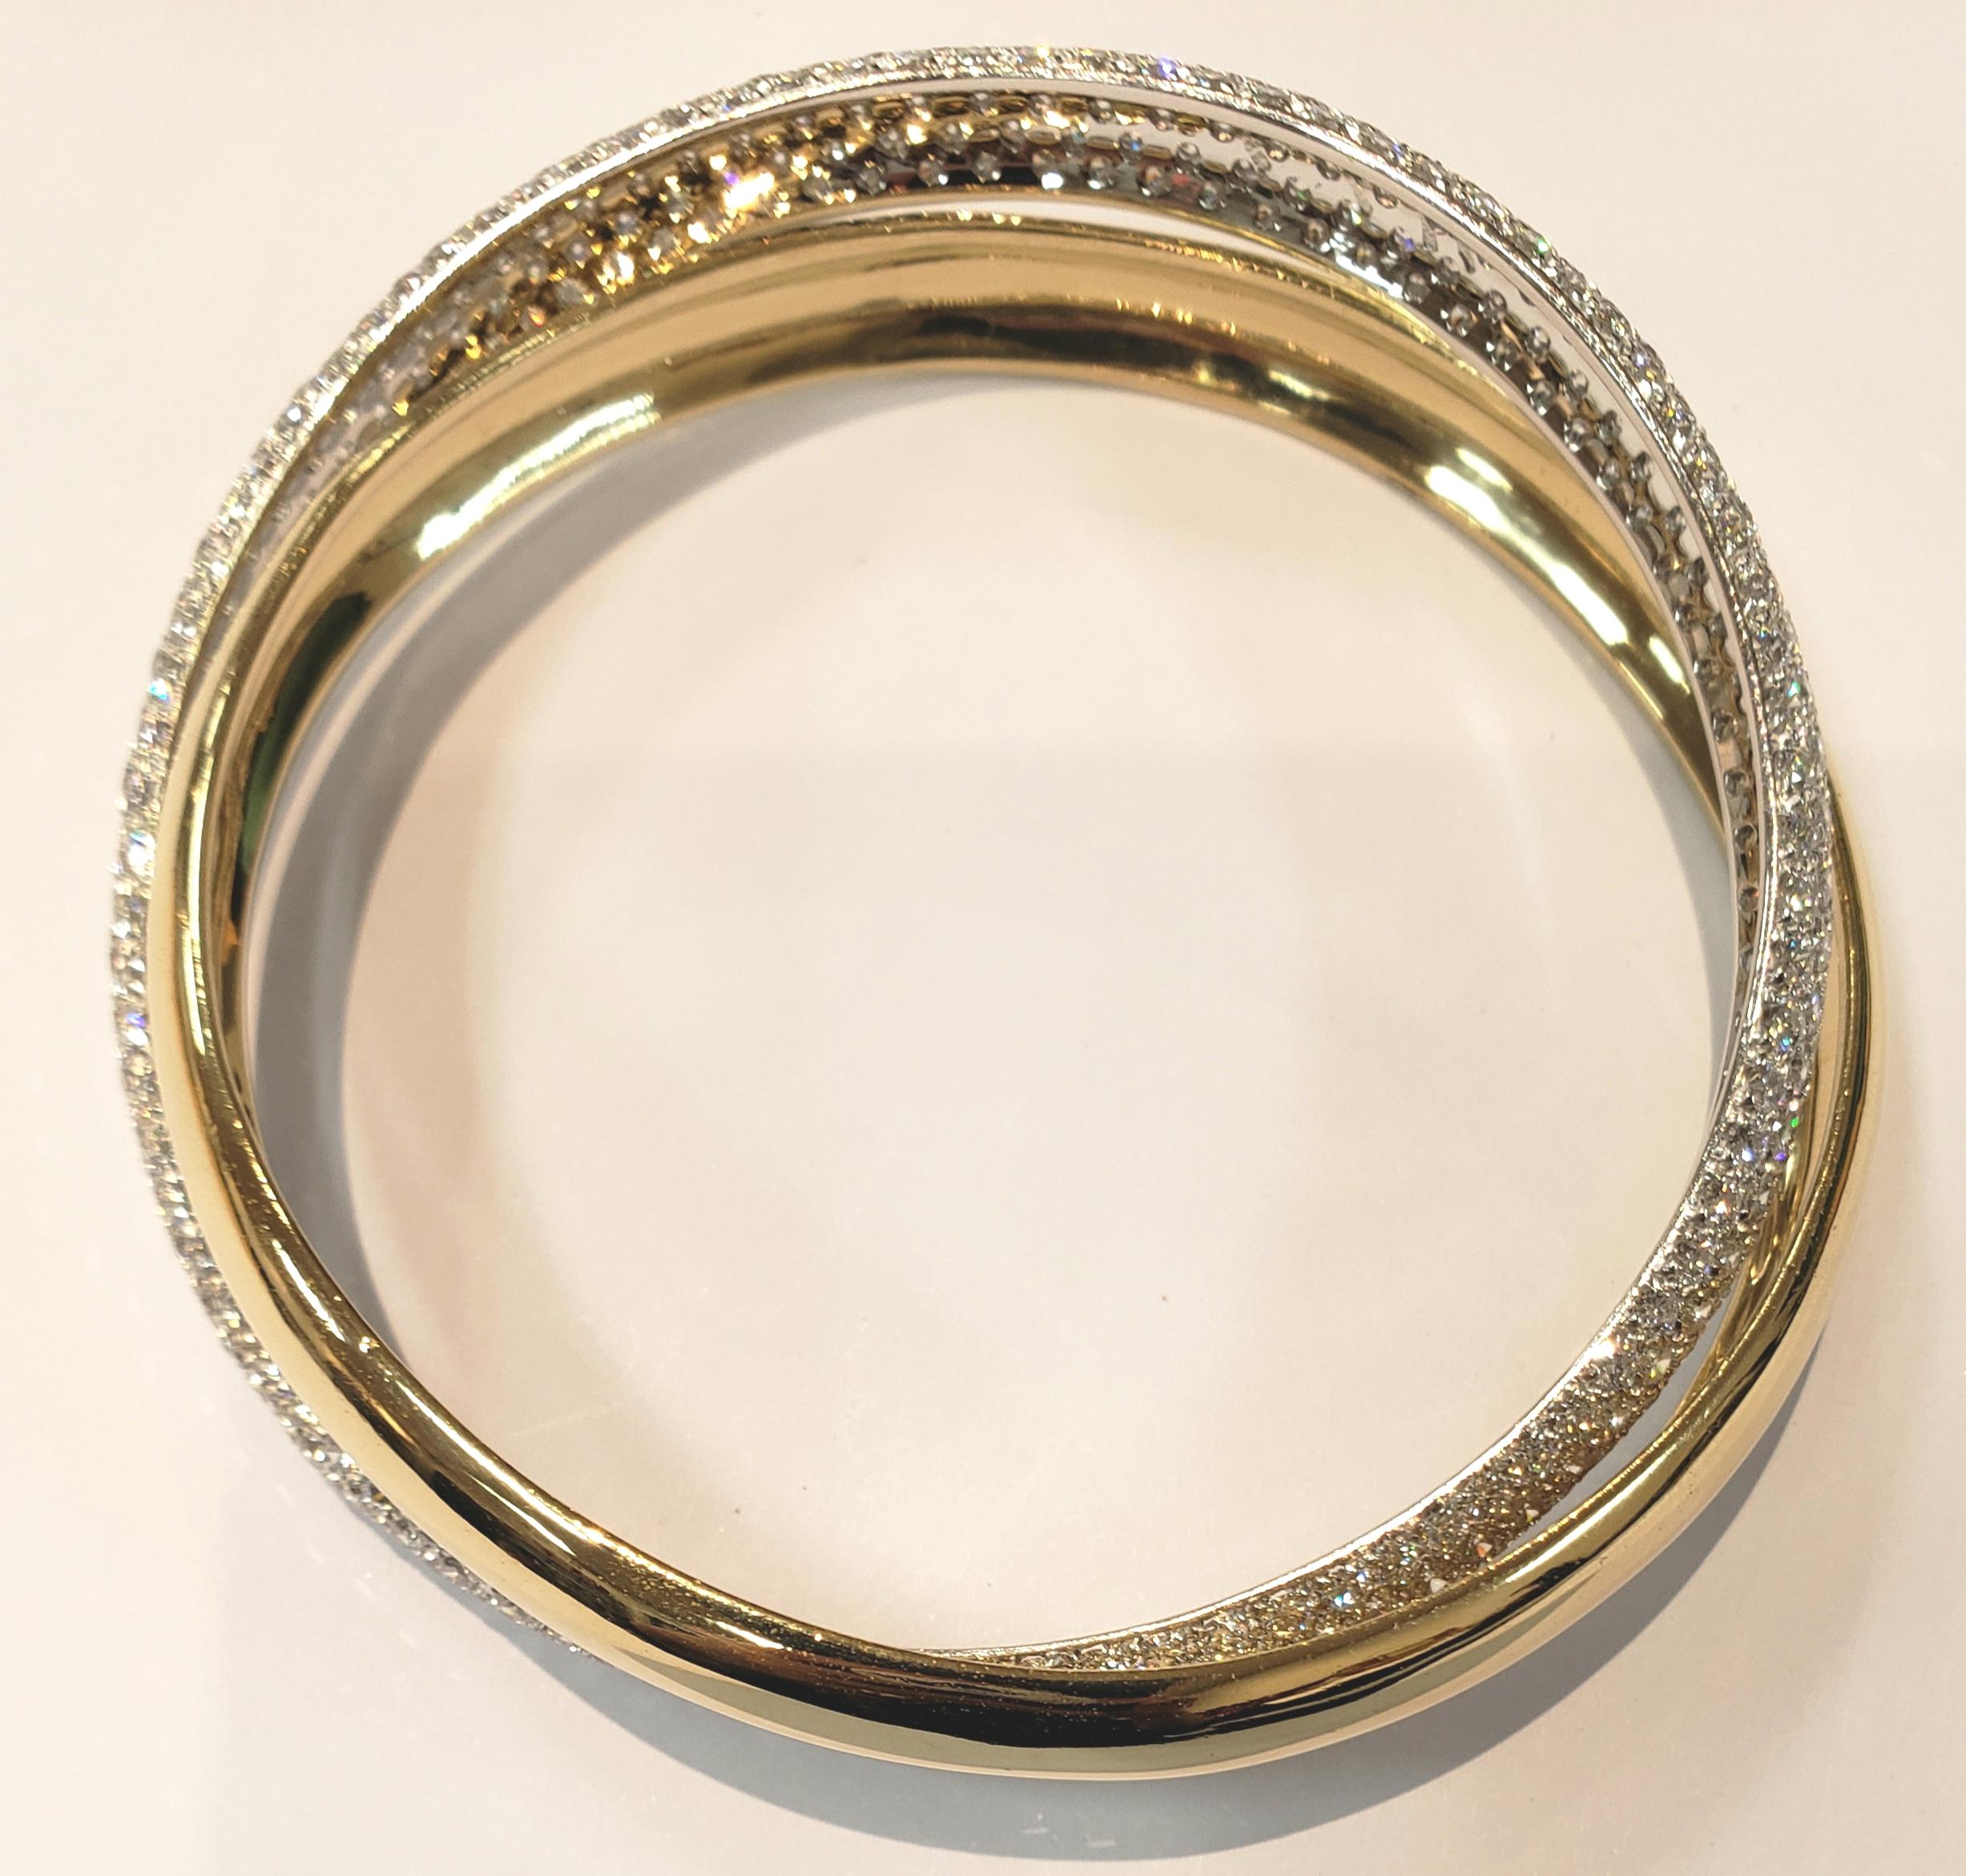 One 18 karat yellow gold round bangle interlocked with one 18 karat white gold and pave diamond bangle makes a gorgeous bracelet. Pave bangle contains 6 rows of full cut round pave set diamonds, for a total weight of 15.36 carats  F-G color 
 VS1-2